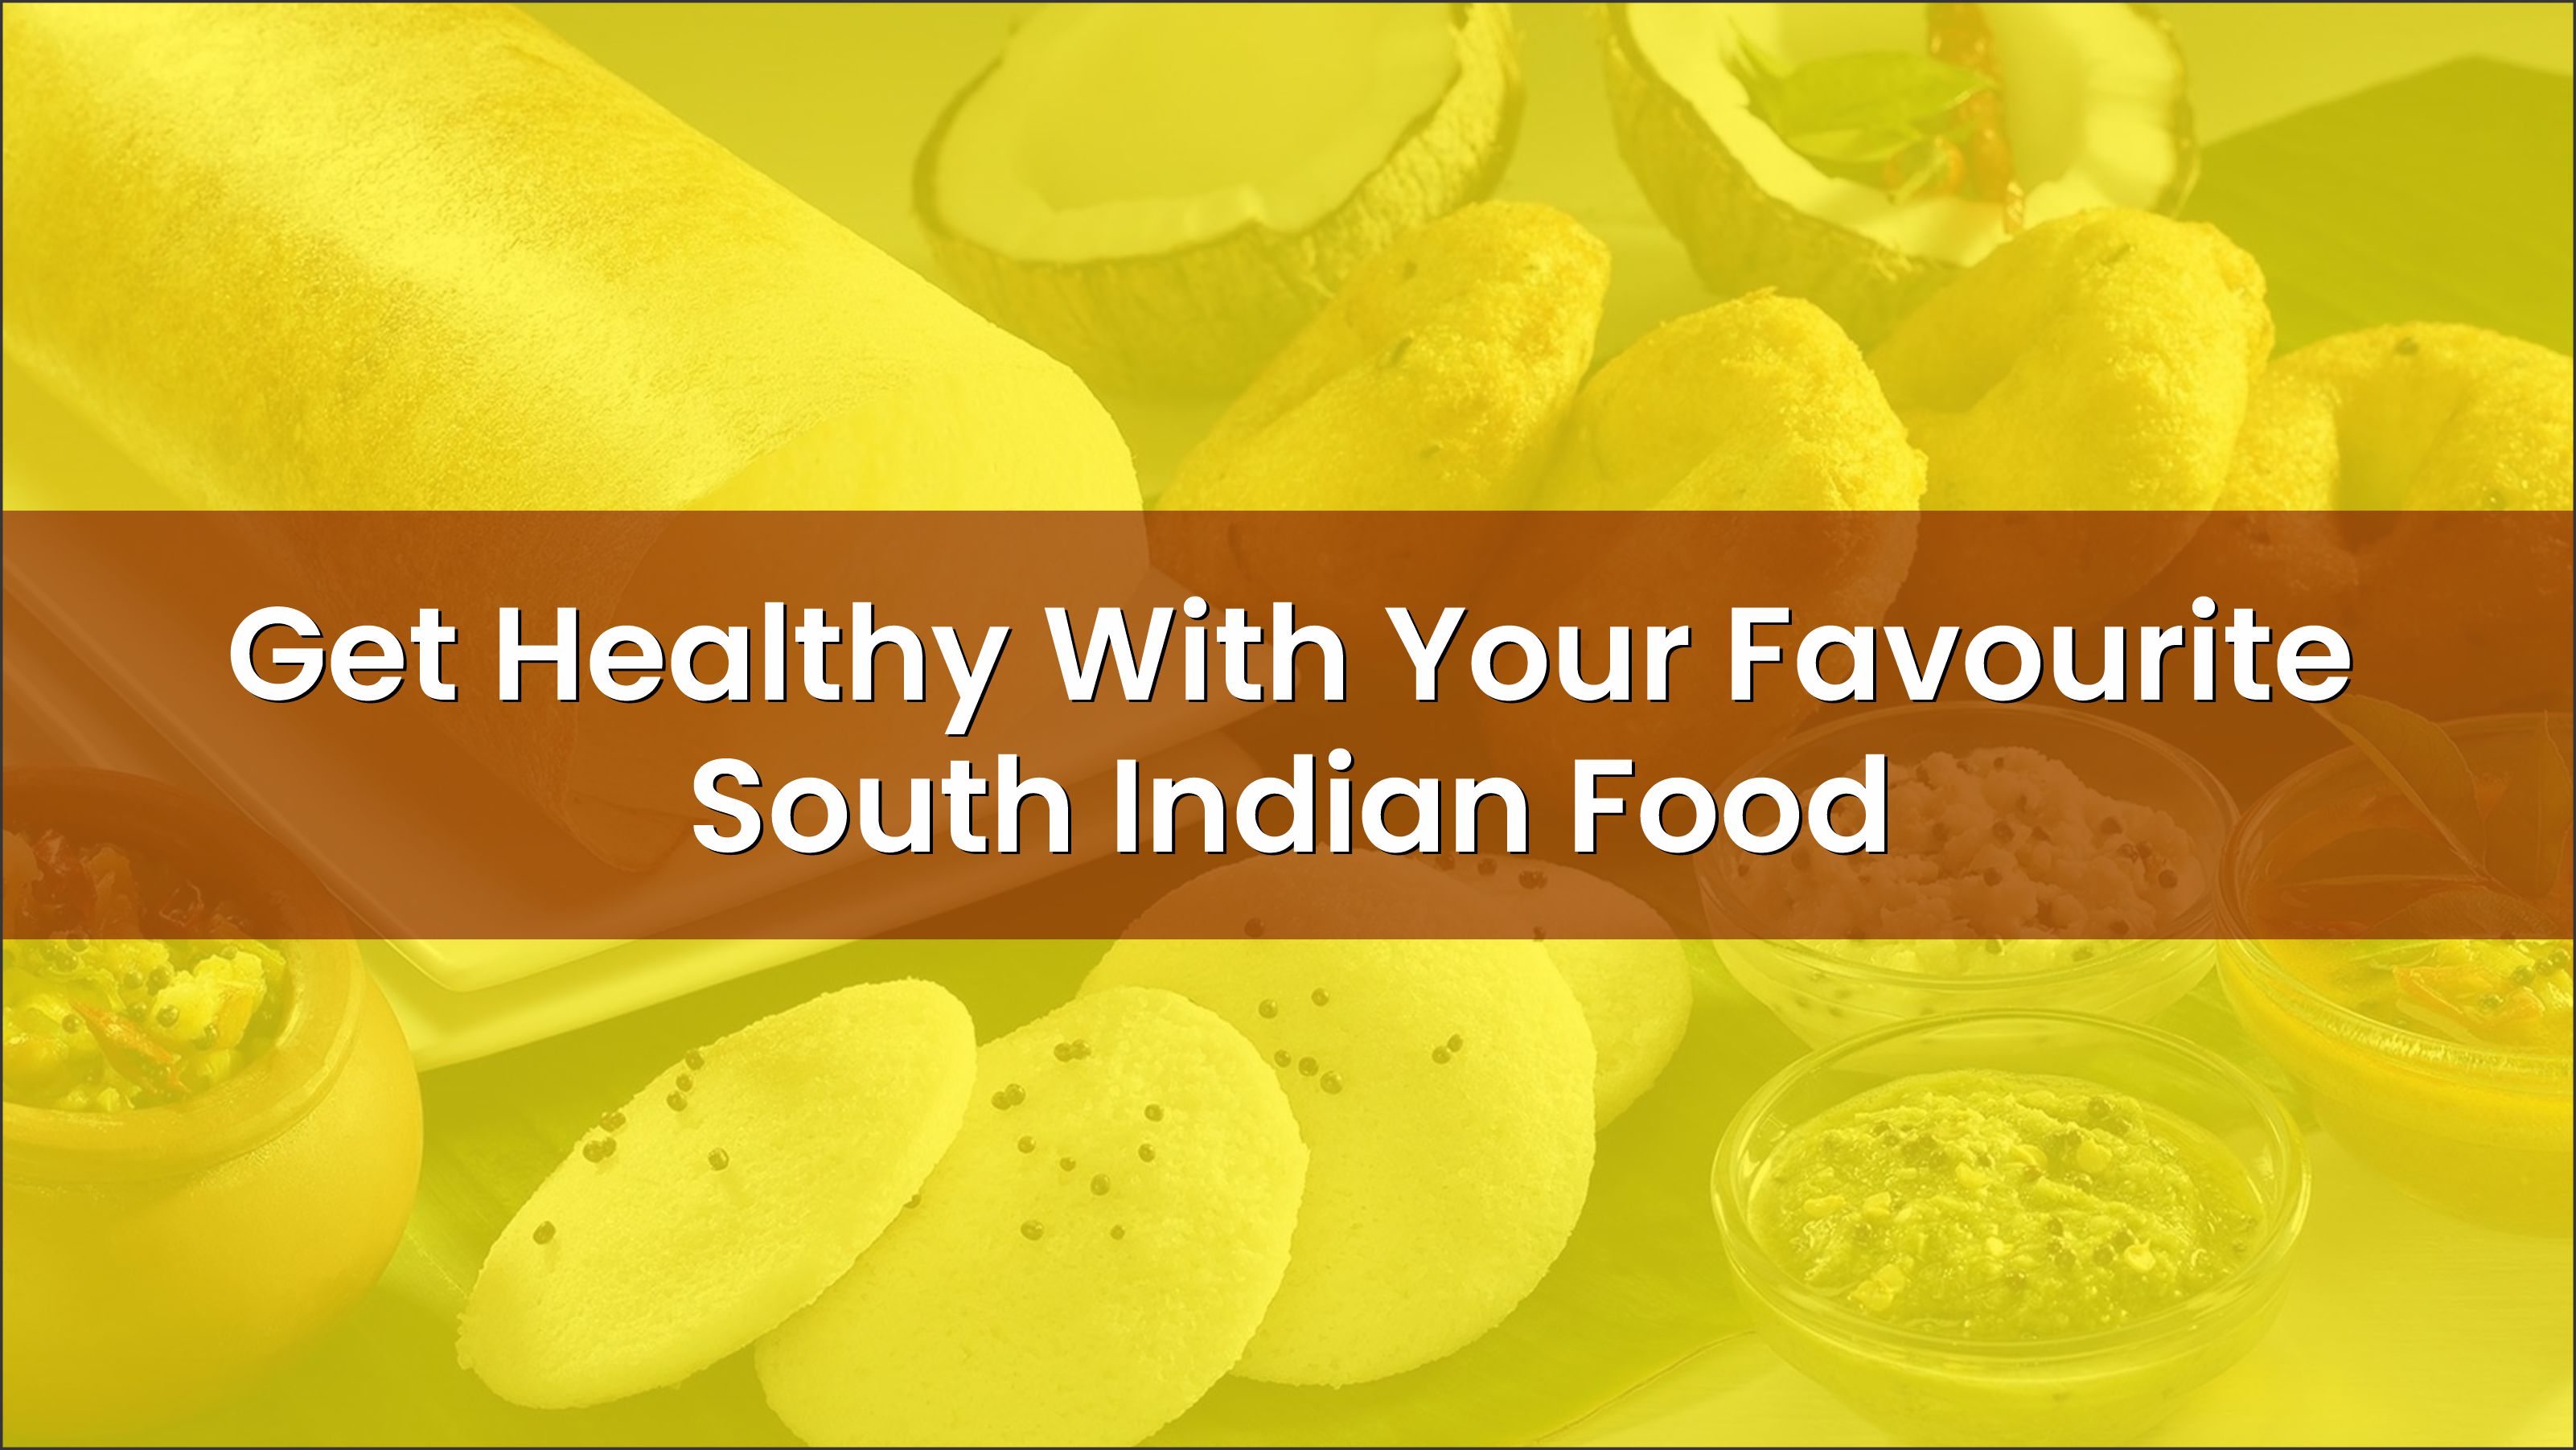 Get Healthy With Your Favourite South Indian Food